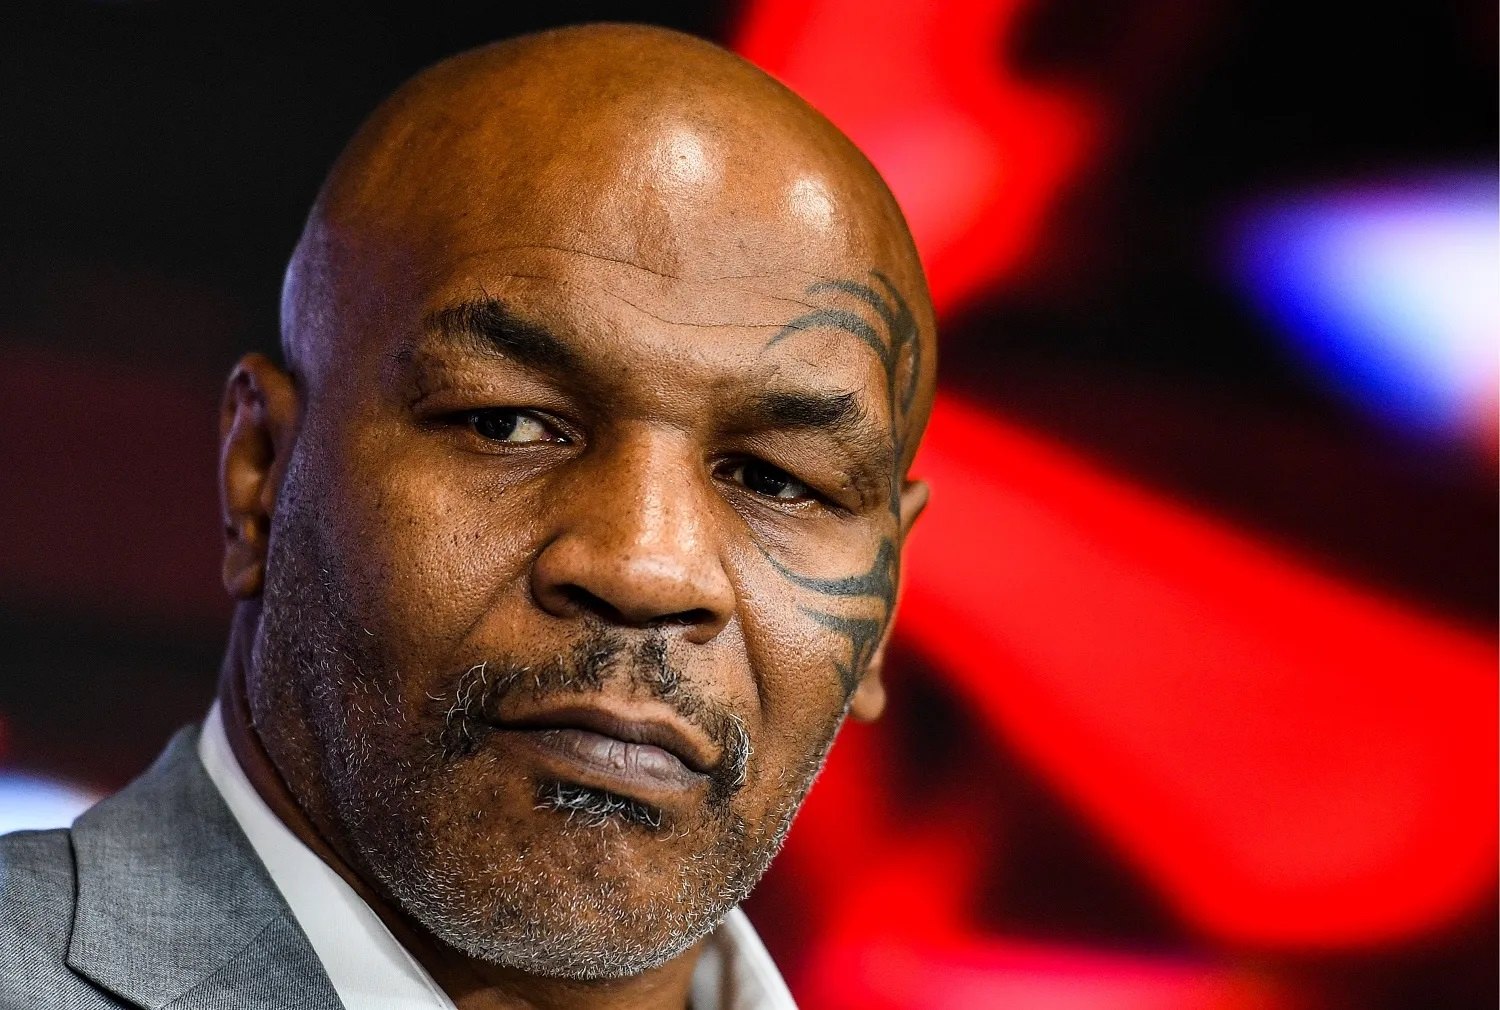 Man Assaulted By Mike Tyson On Plane Demands $450K, Boxer’s Lawyer Calls It ‘A Shakedown’